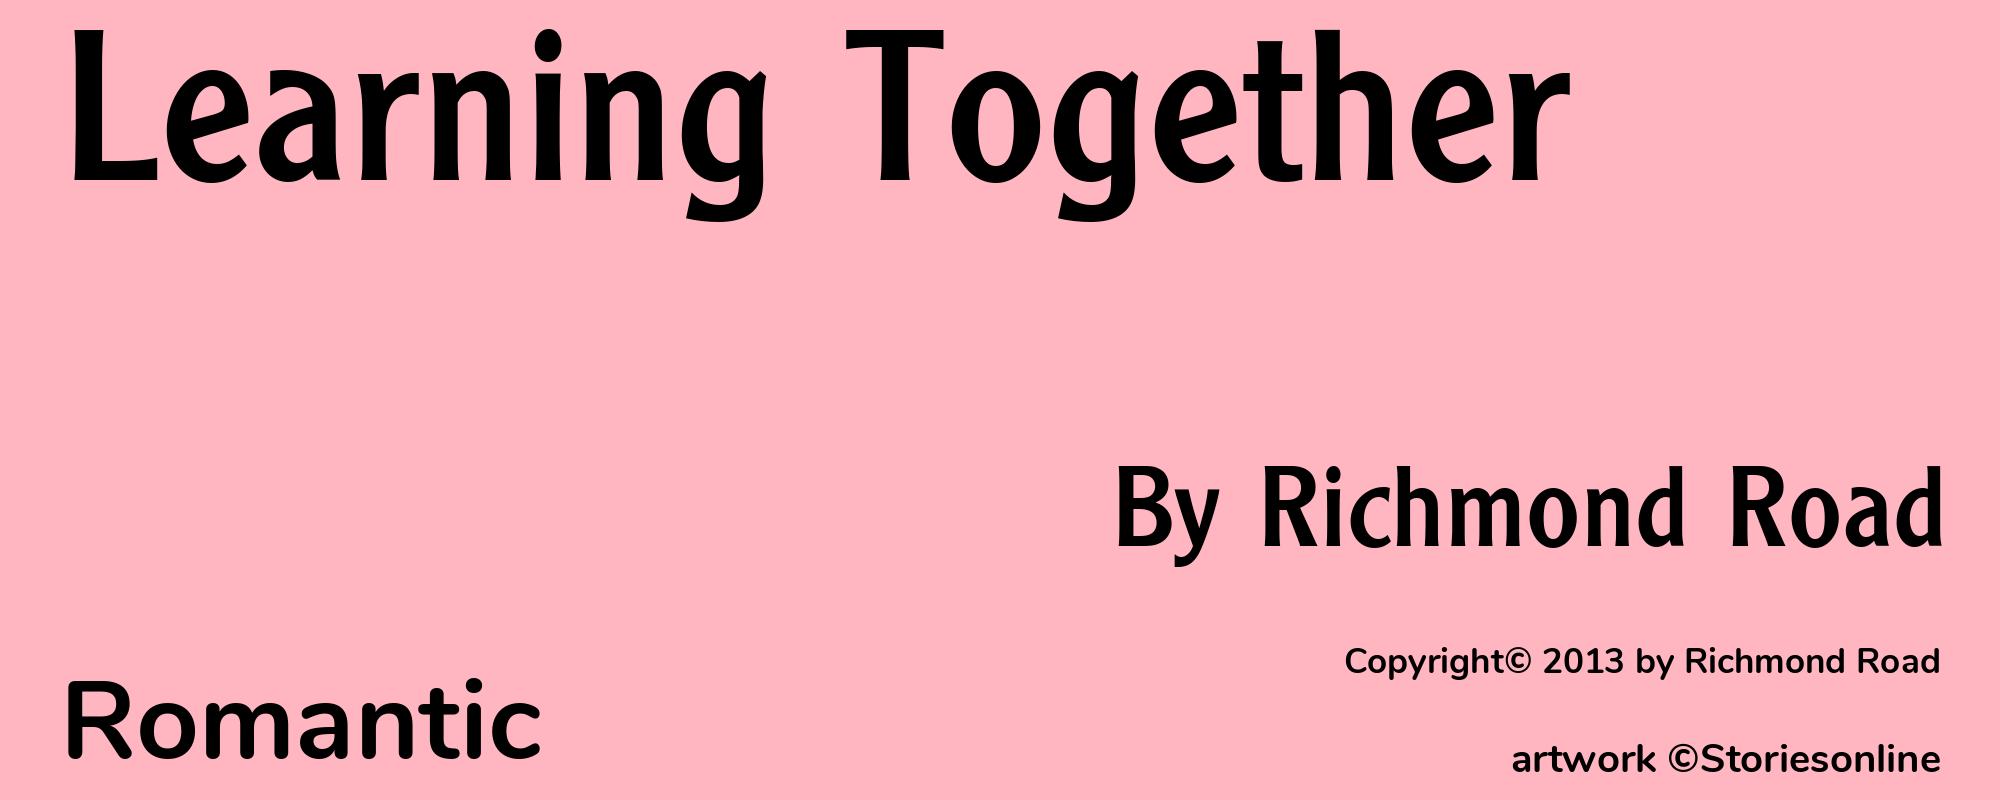 Learning Together - Cover